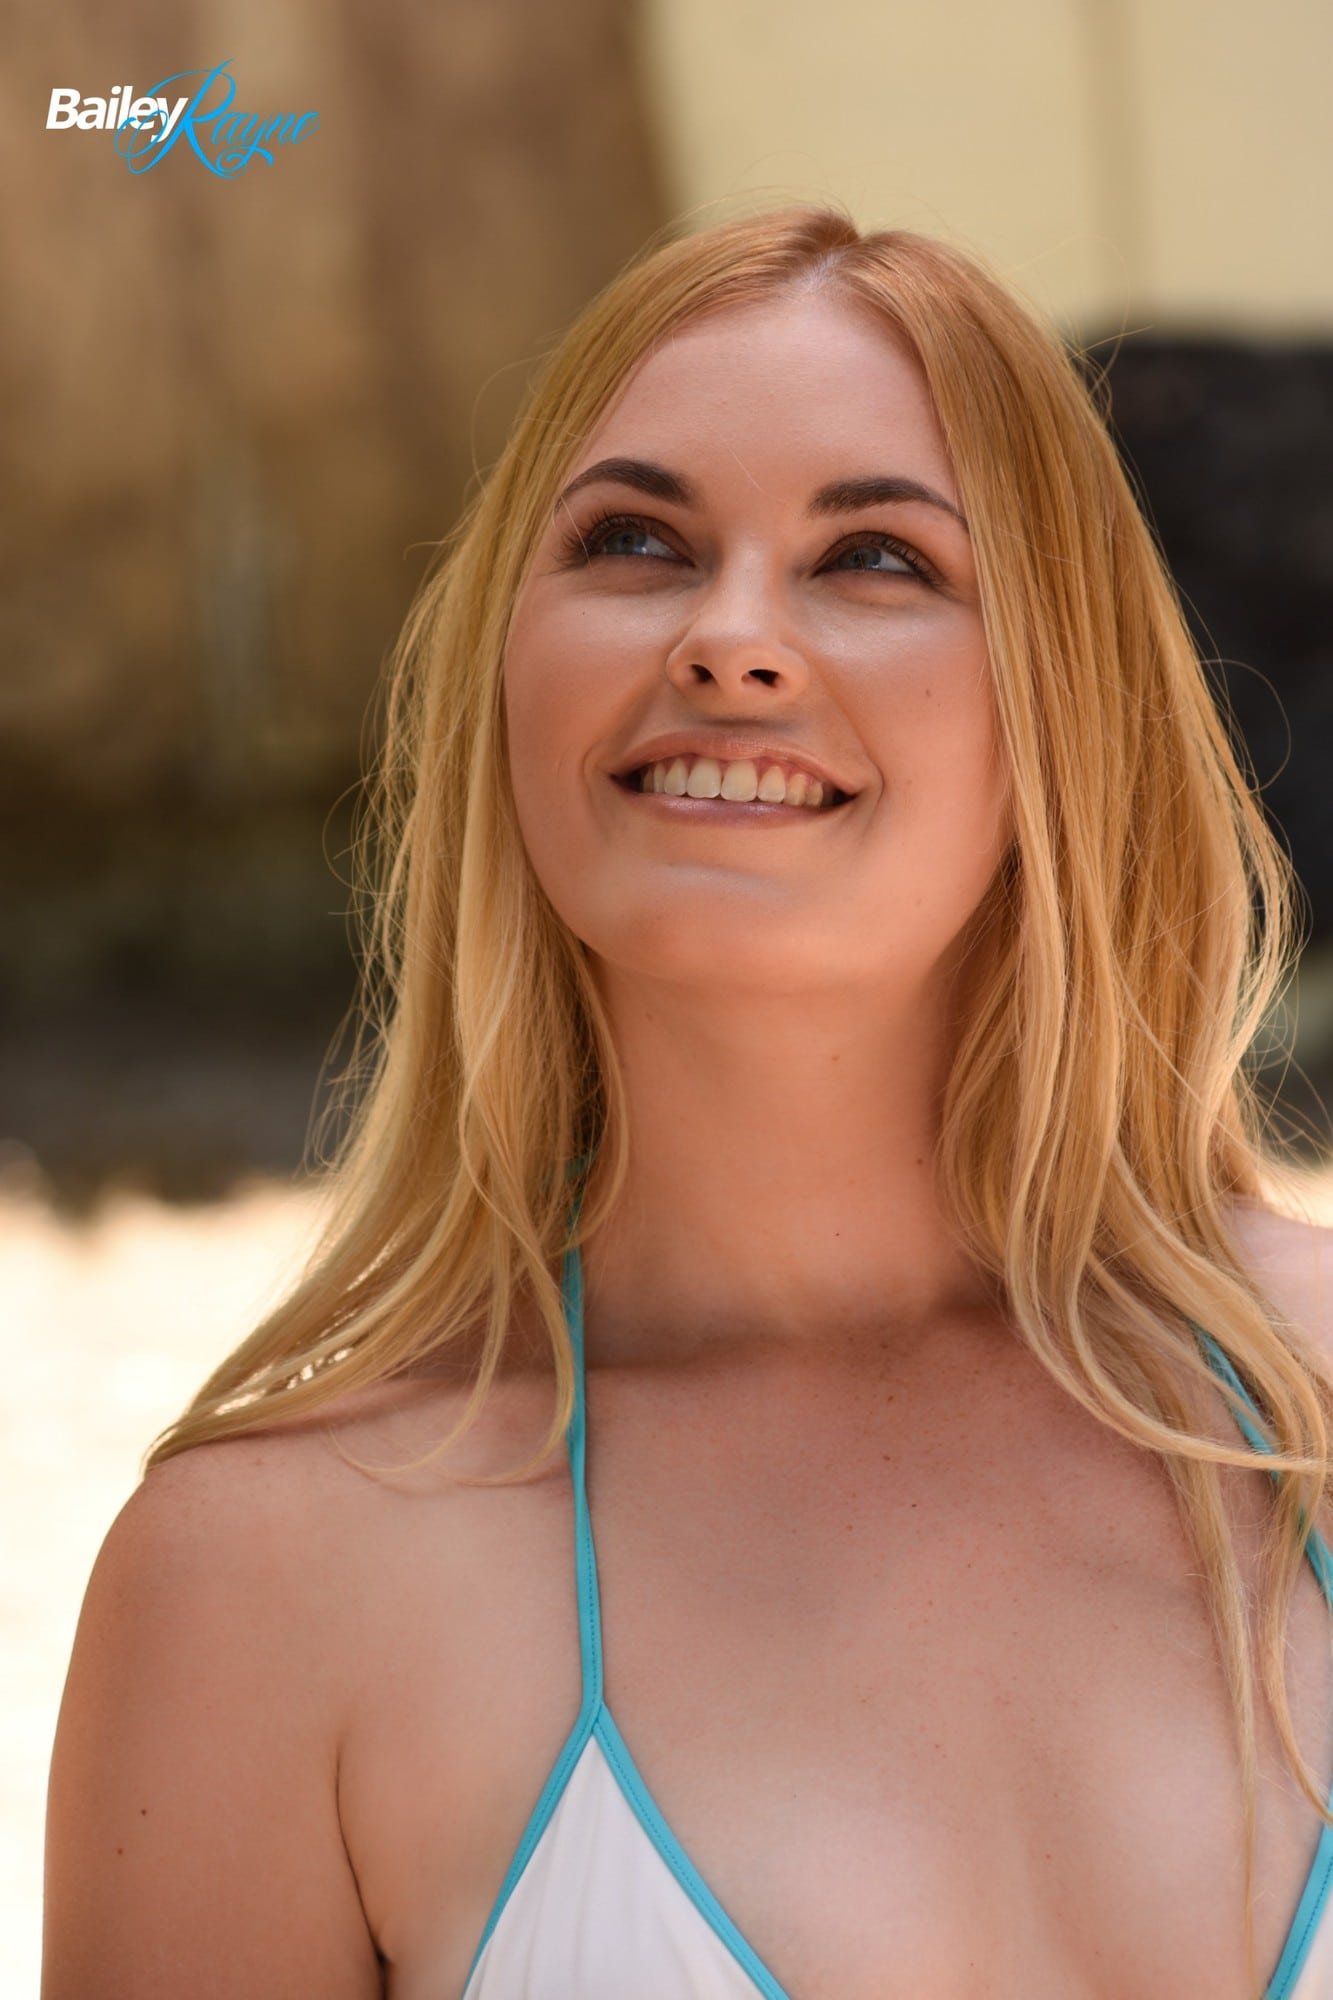 Young surfer girl Bailey Rayne is pure natural beauty